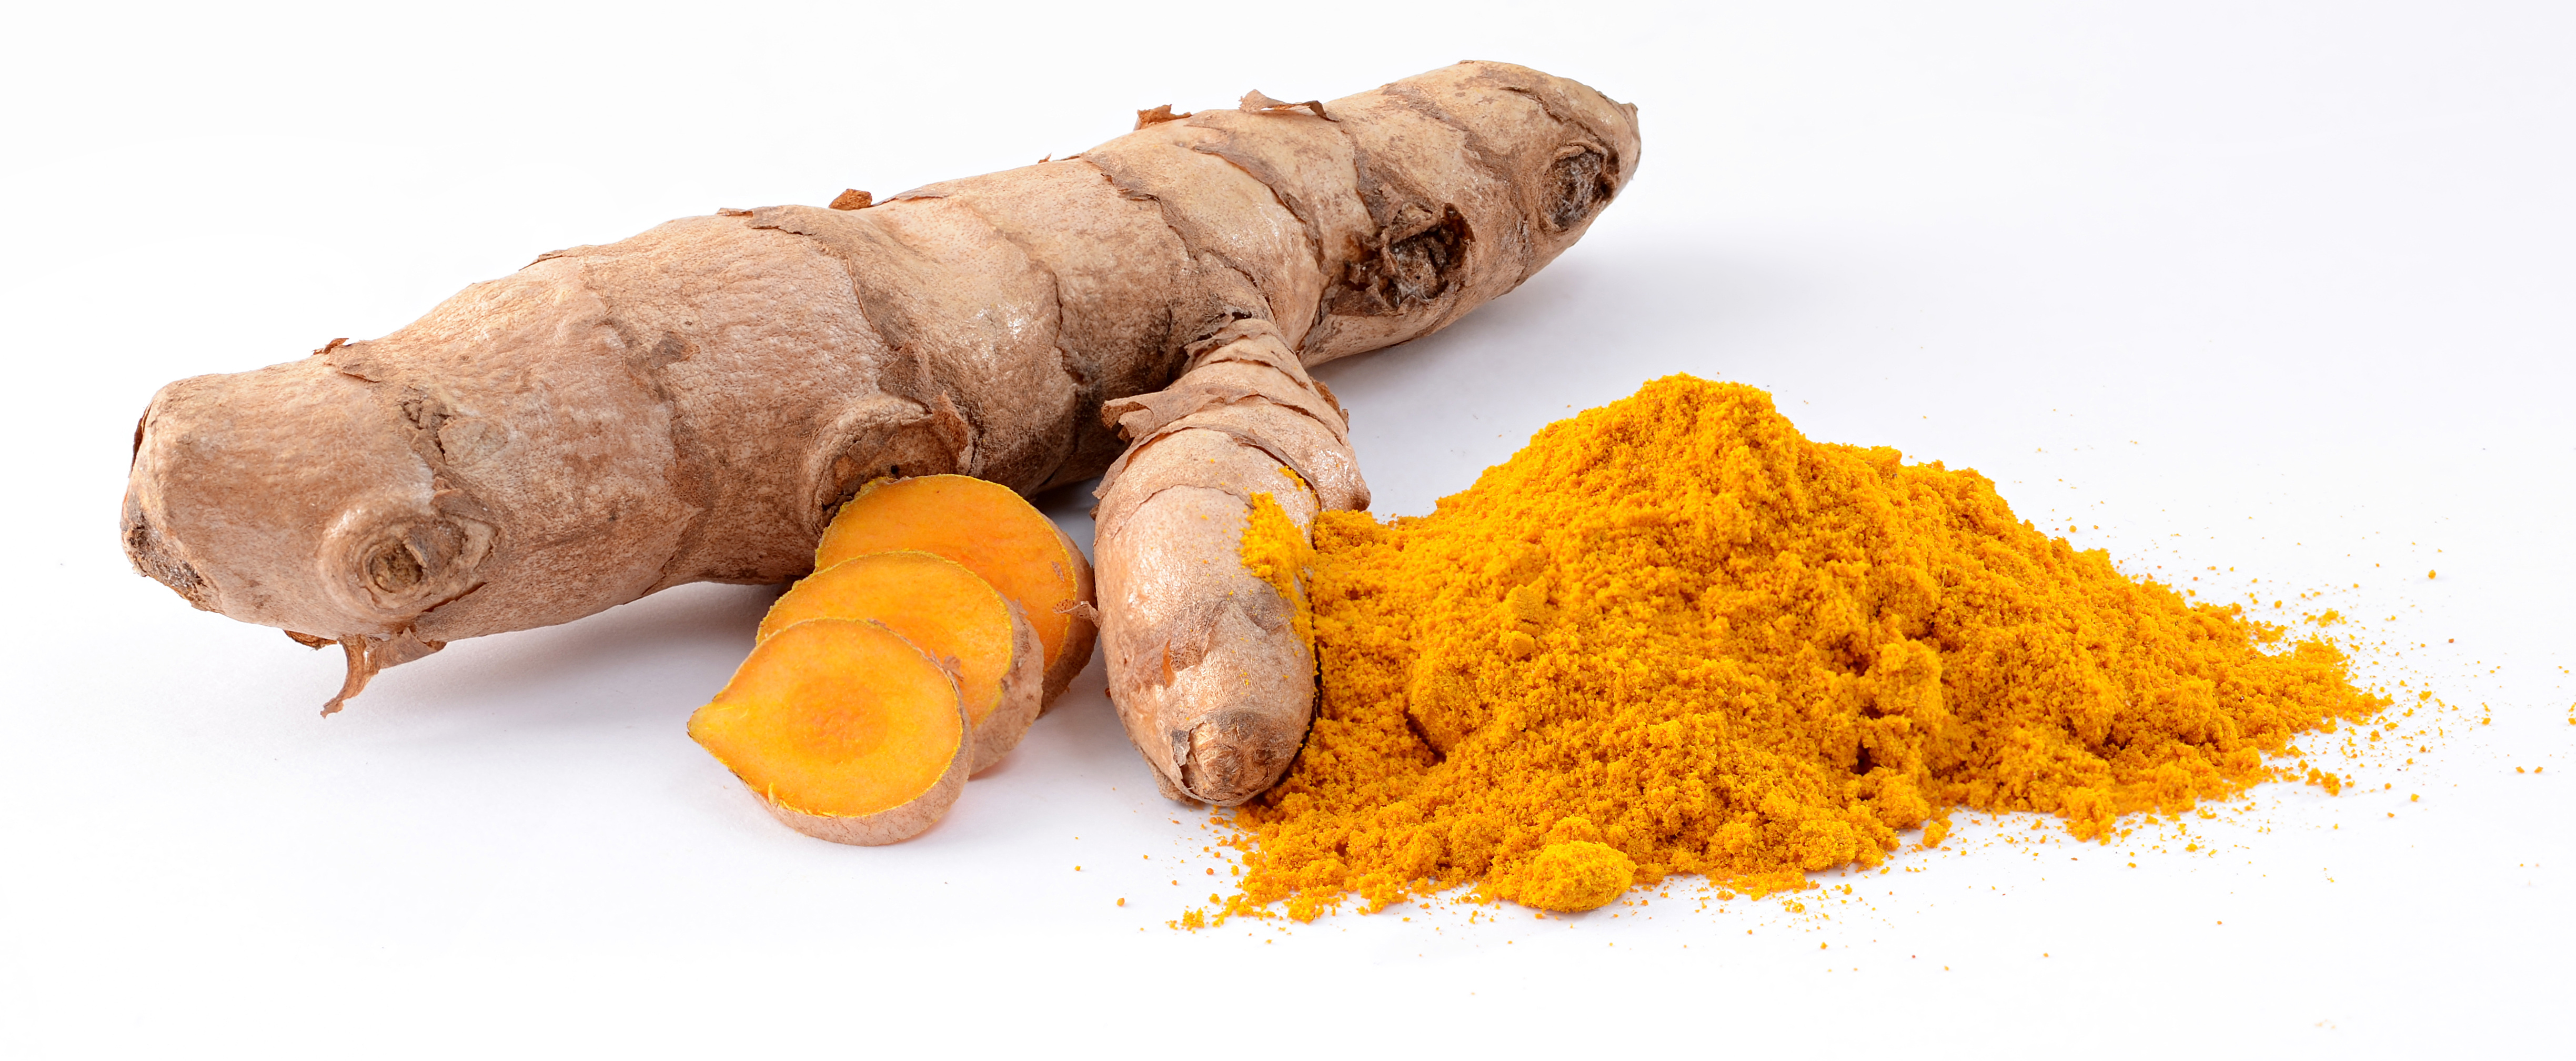 - The Role of Curcumin in Supporting Heart Health